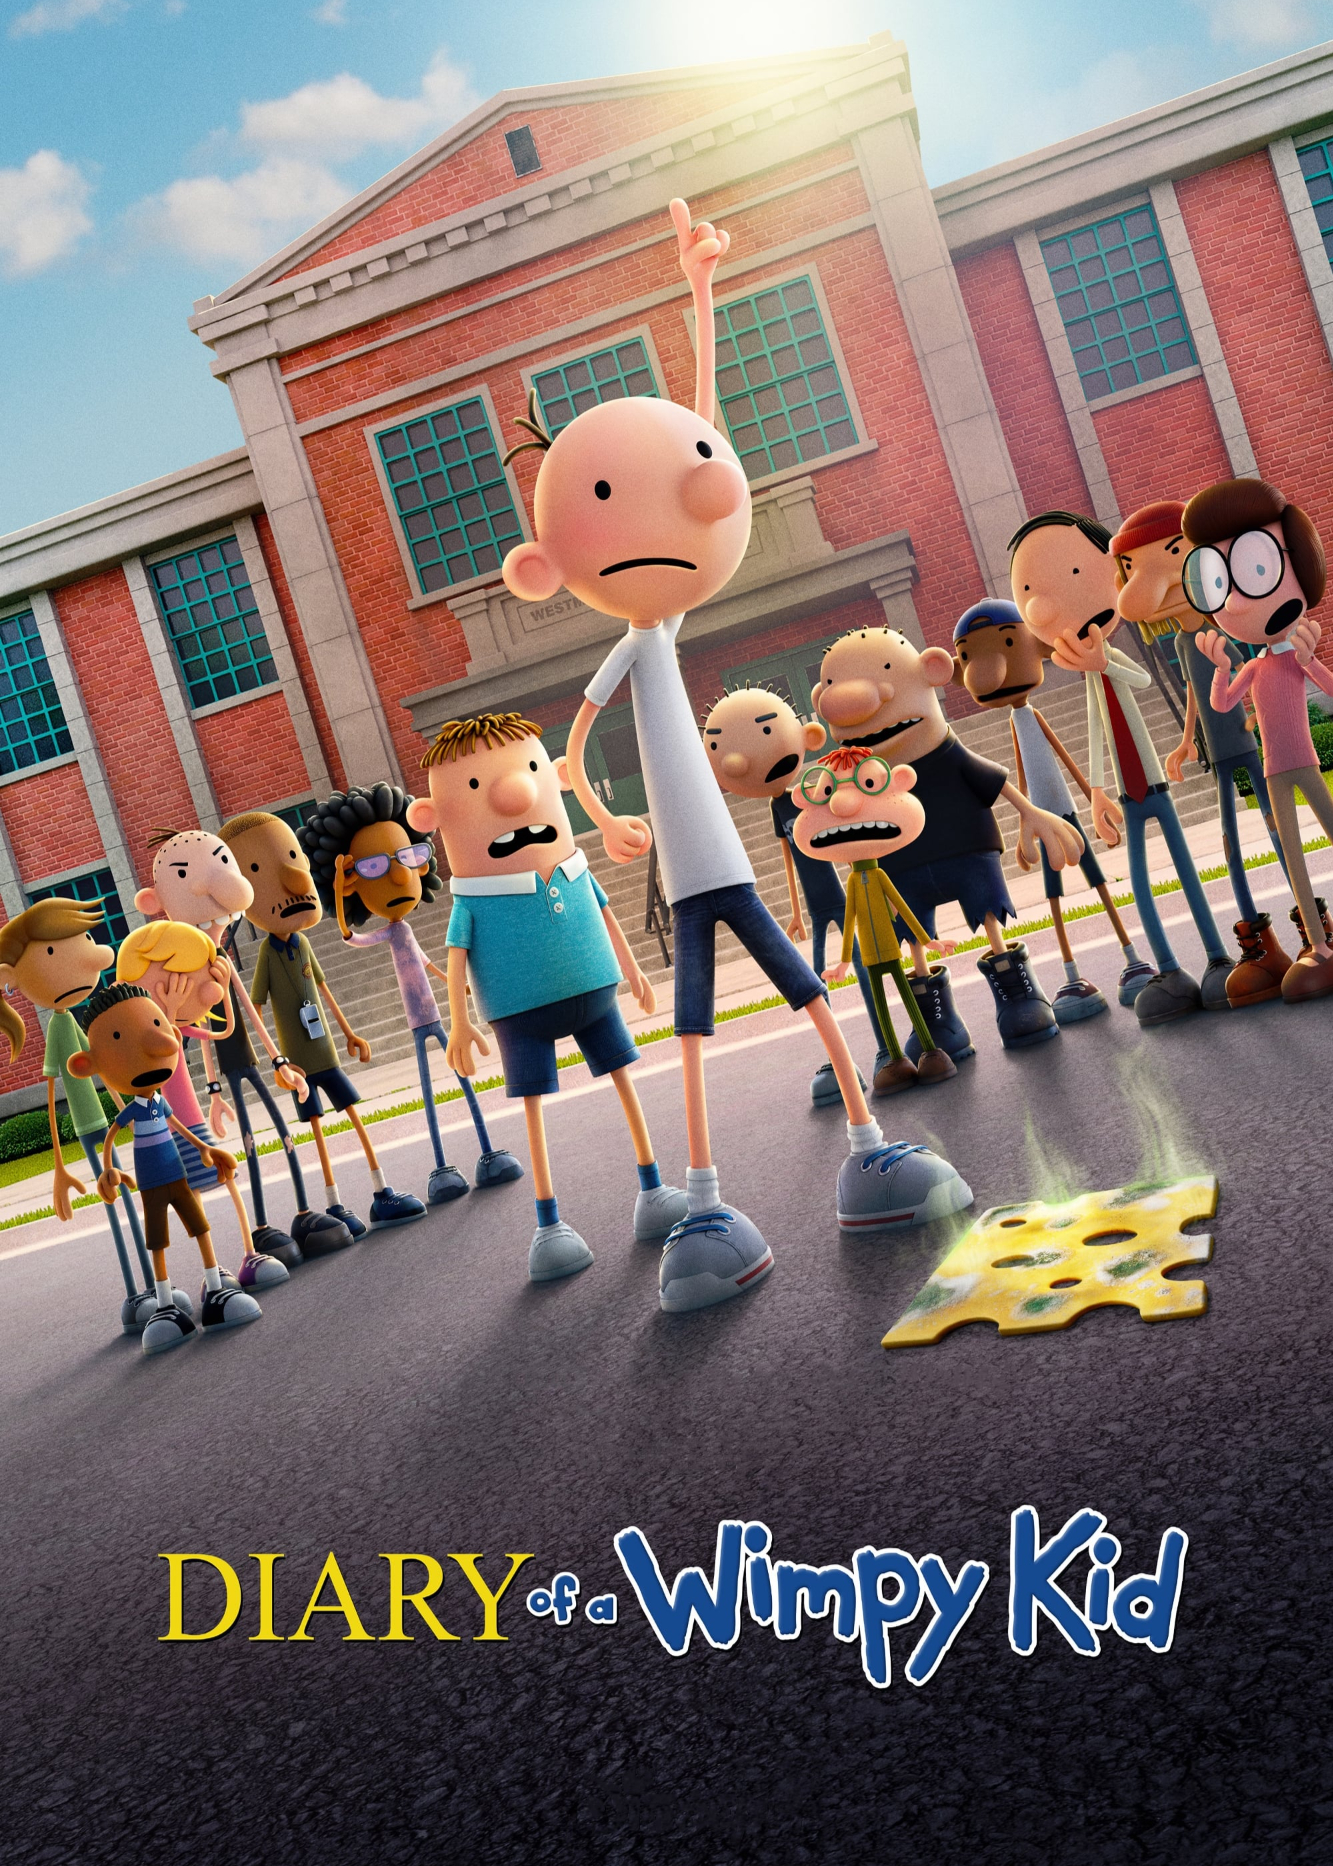 Poster Phim Diary of a Wimpy Kid (Diary of a Wimpy Kid)